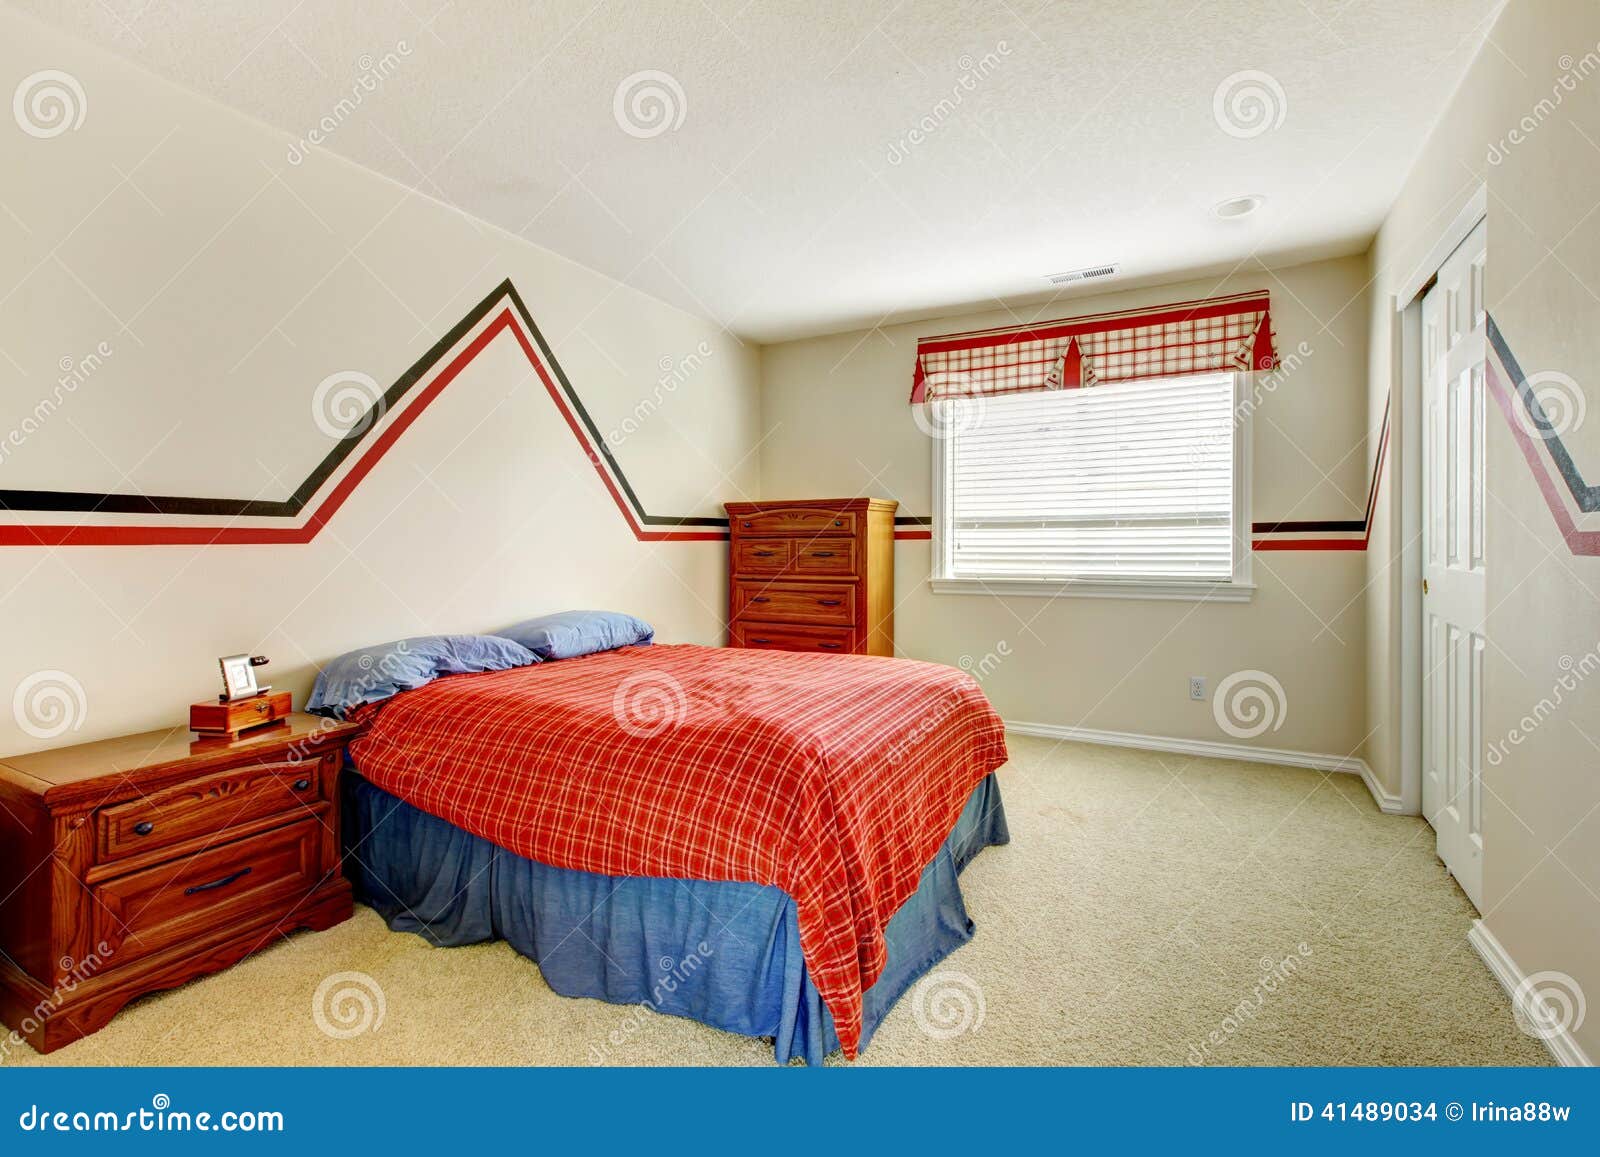 Bedroom With Painted Wall And Bright Colors Bed Stock Photo